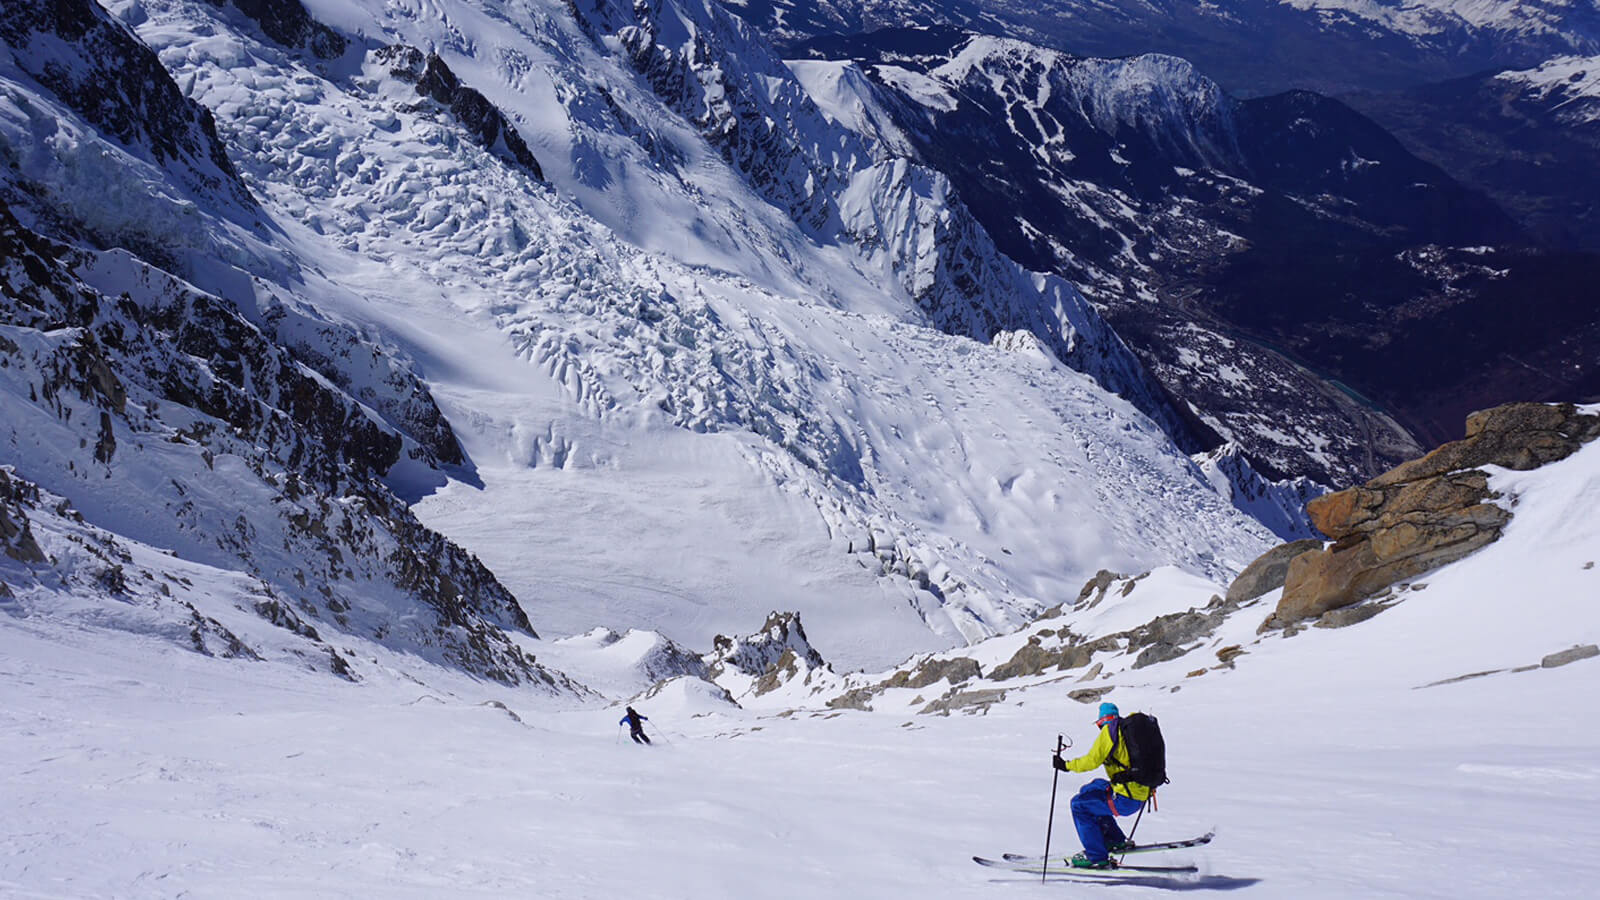 IFMGA Guide Mike Arnold skiing in Chamonix